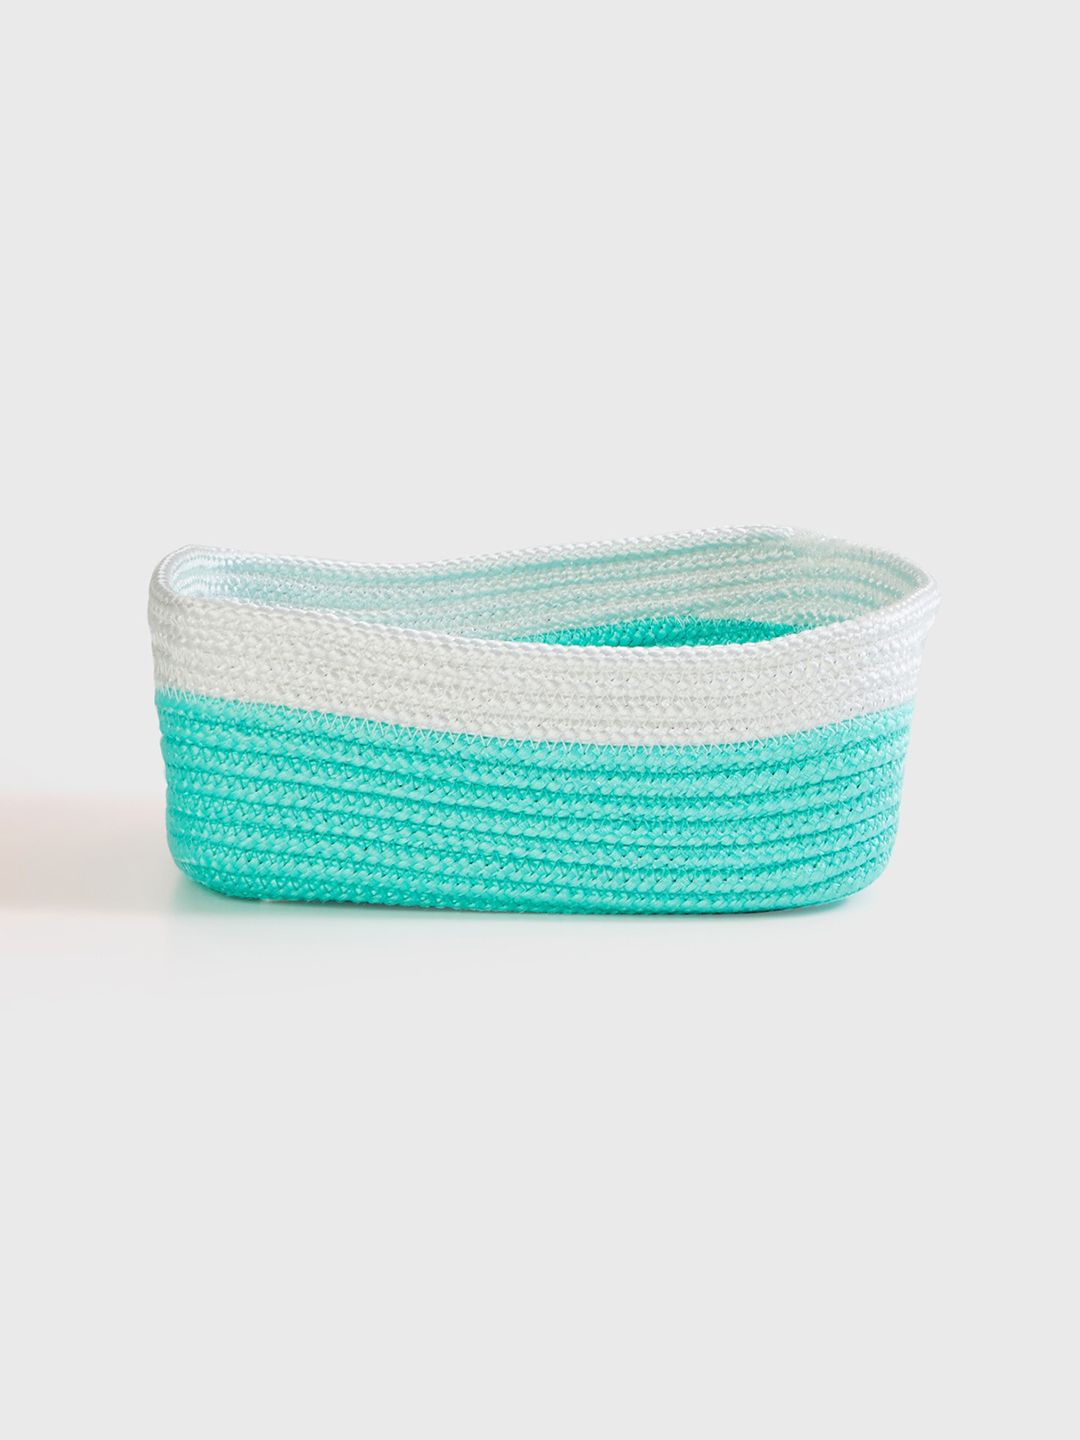 Home Centre Teal-Blue & White Colourblocked Braided Laundry Basket Price in India